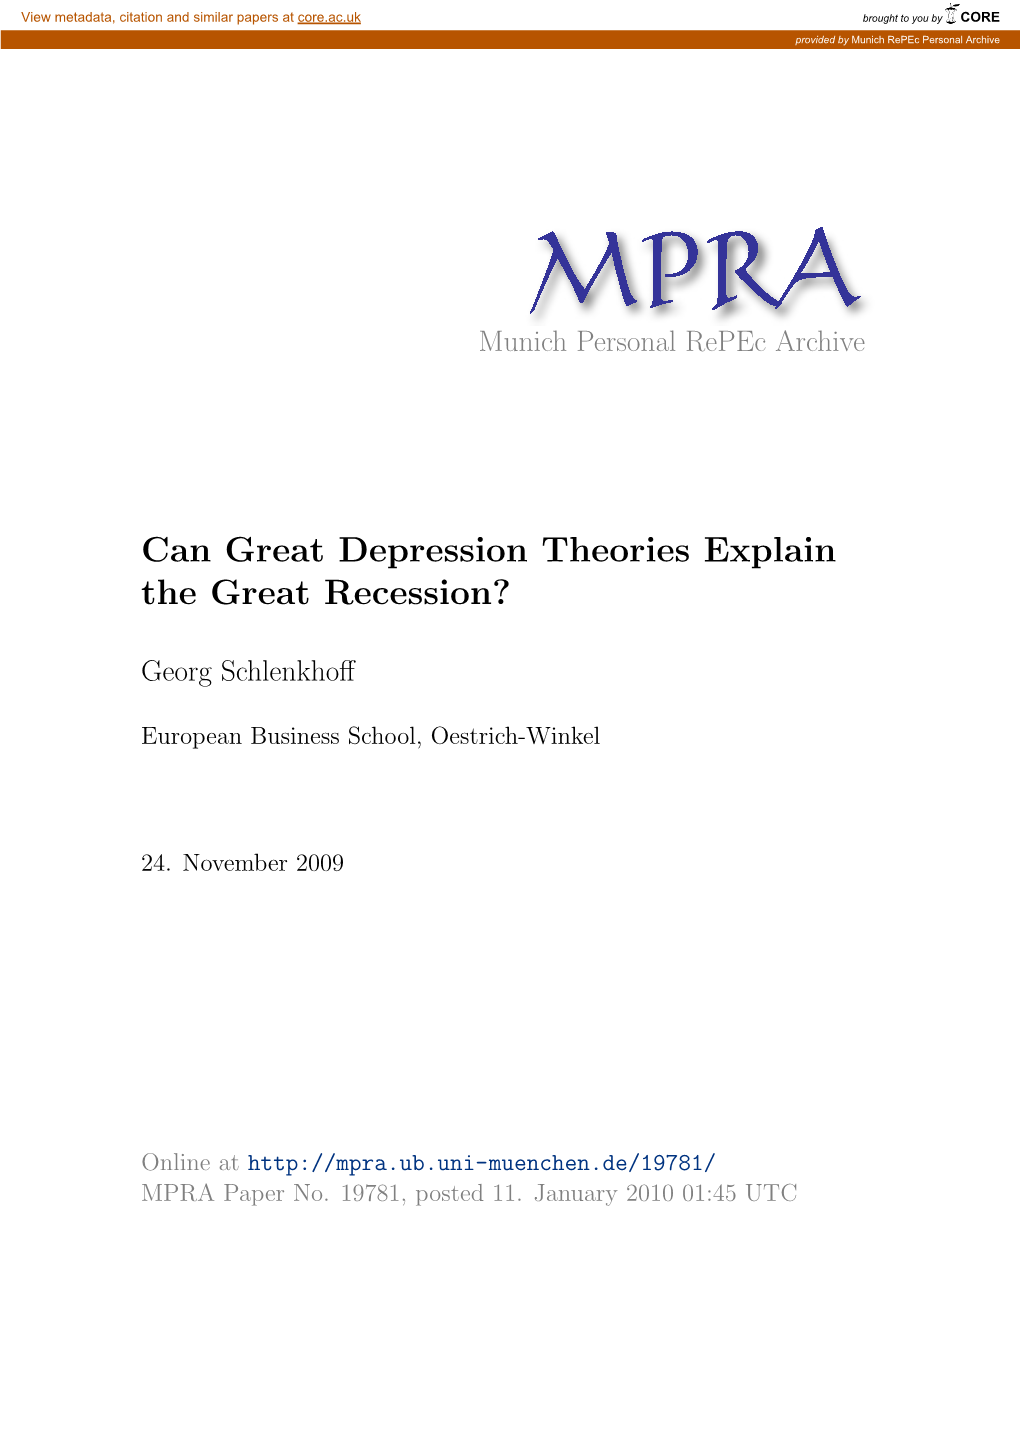 Can Great Depression Theories Explain the Great Recession?